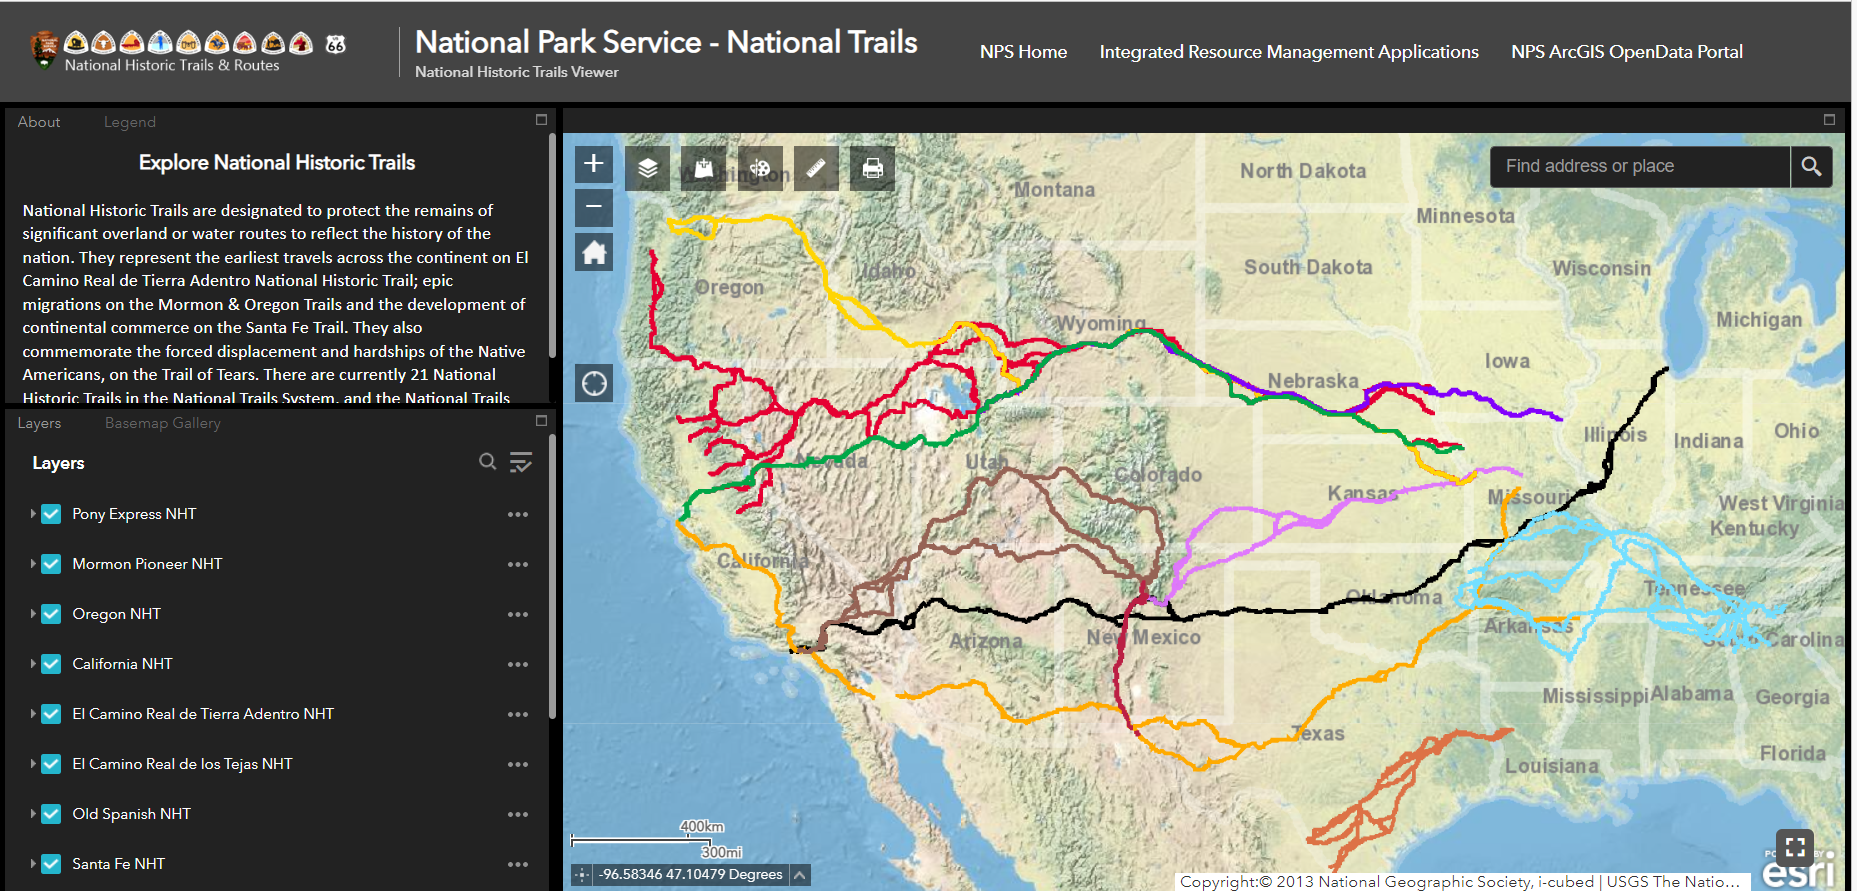 An image of the United States depicting multiple trails across many states.